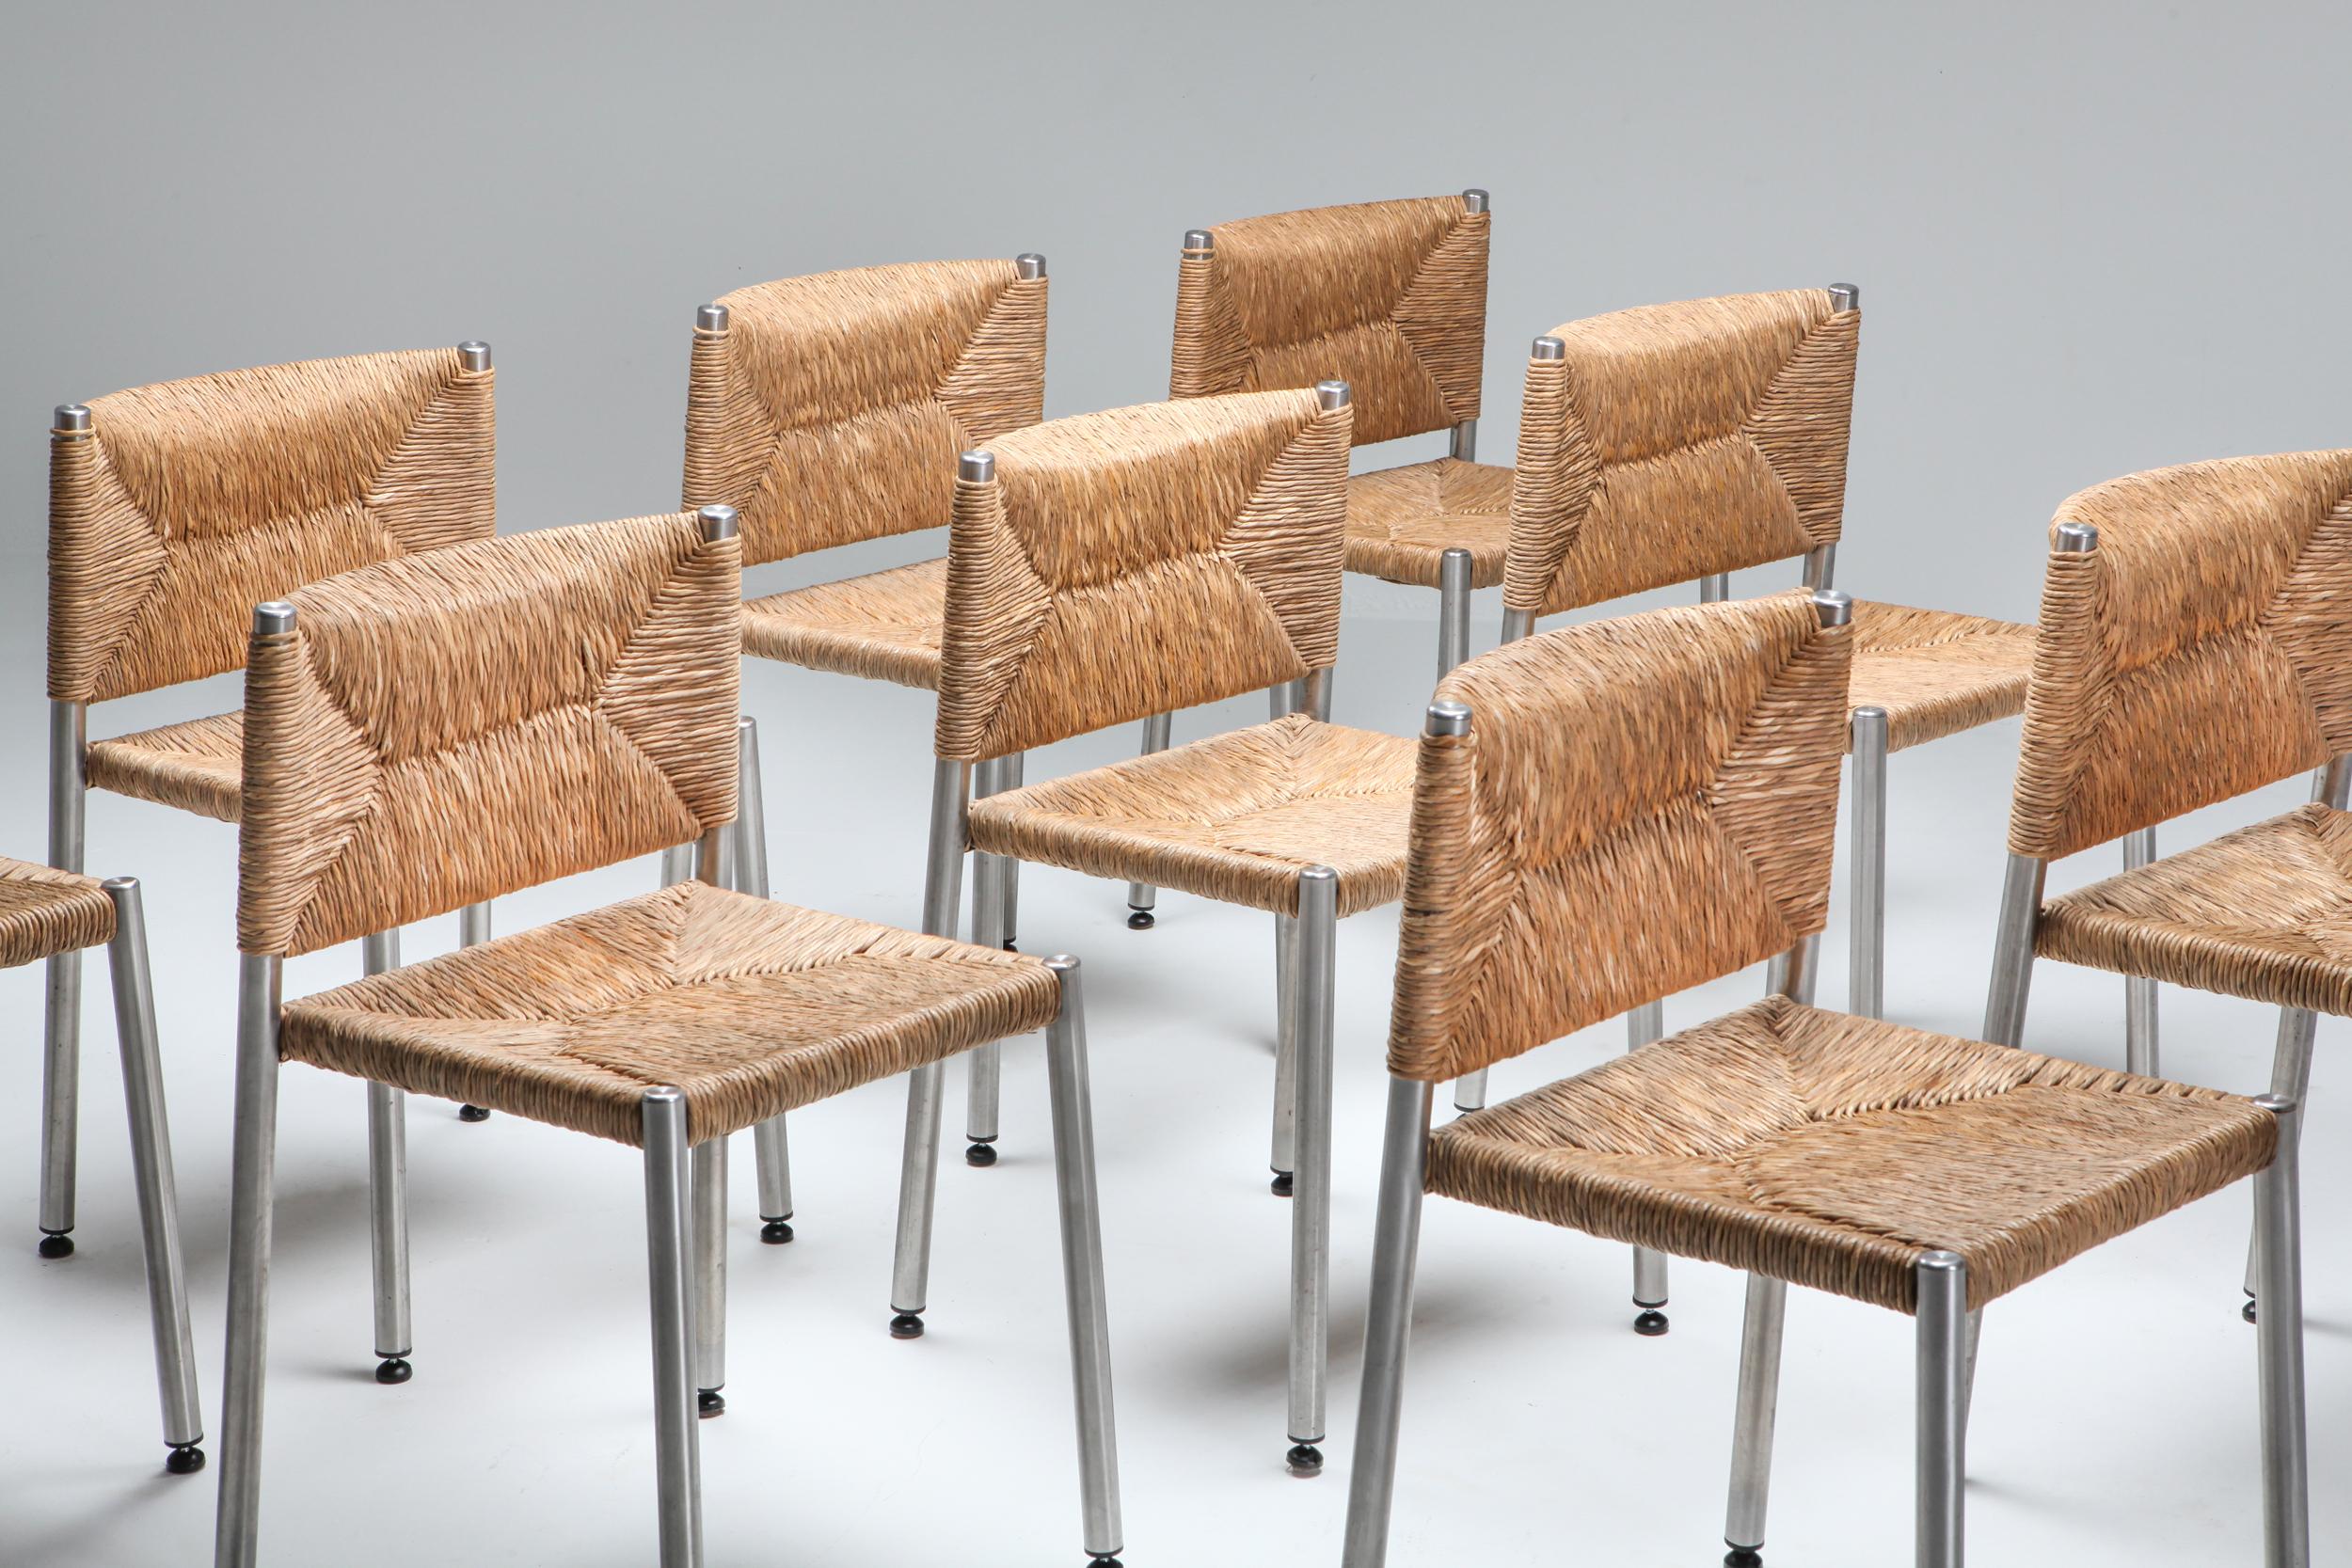 Dining chairs in seagrass and aluminum, European 1980s; Postmodern; Armchair; Dining chair; Dining set;

A Postmodern variant of a classical rustic modern design chair.
We have 10 chairs available.